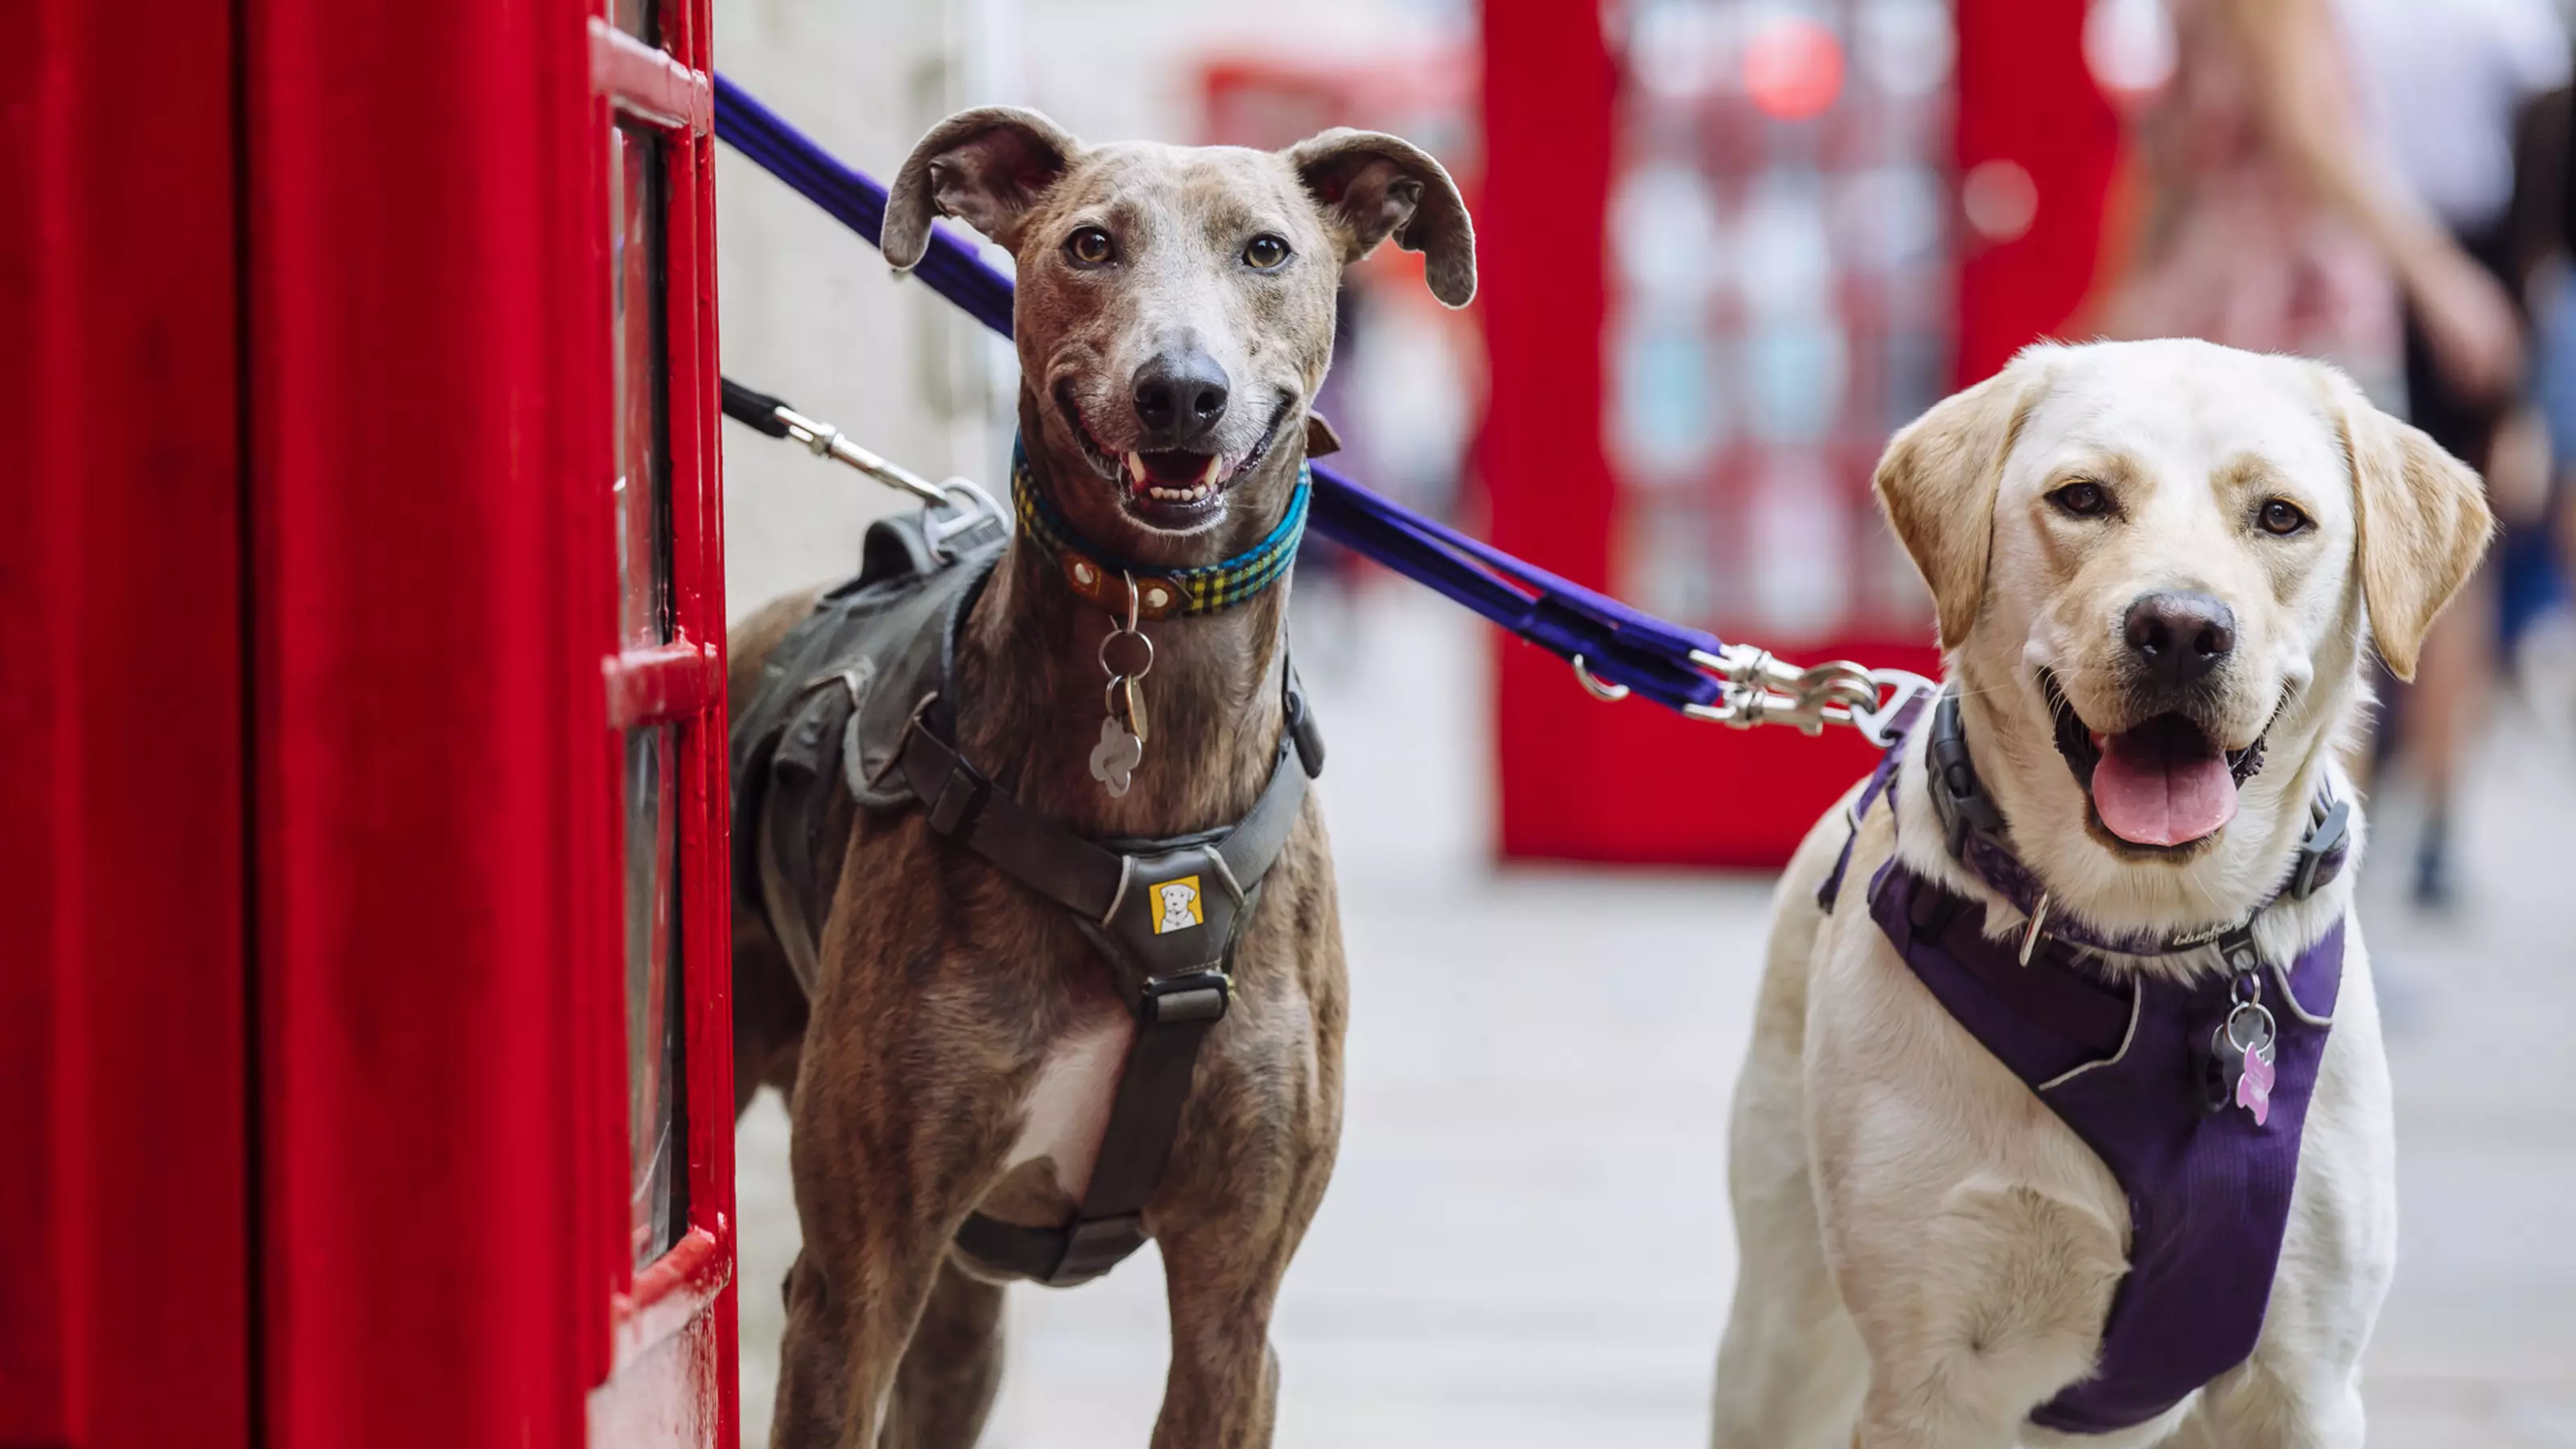 Brindle lurcher (left) and golden labrador (right) by red London phone box